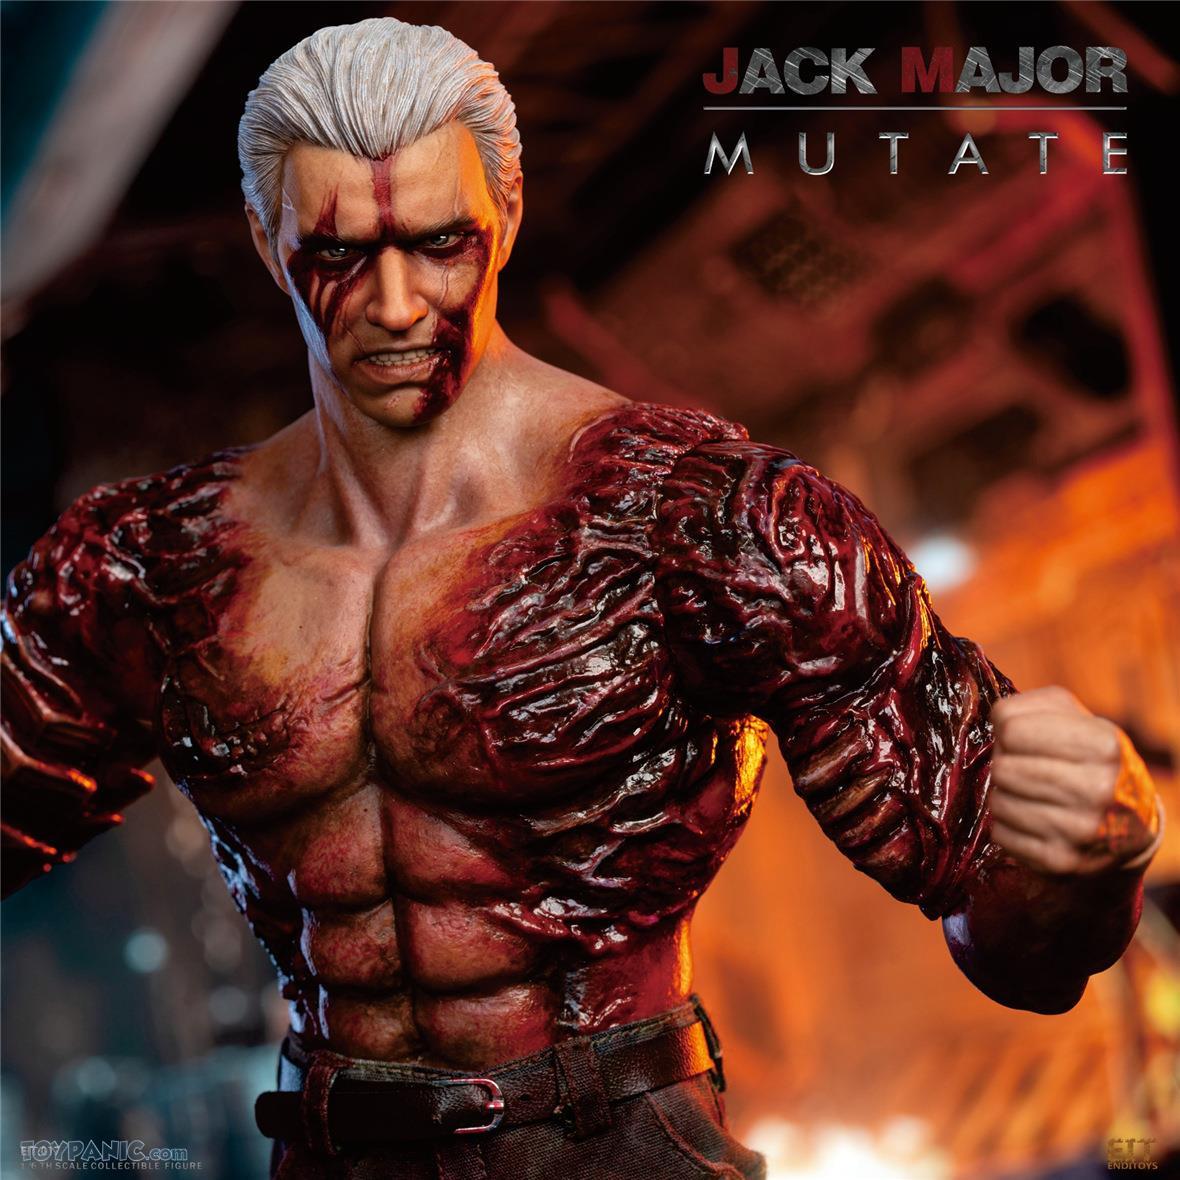 residentevil - NEW PRODUCT:  1/6 Jack Major Mutate from End I Toys  2732024105954AM_720776